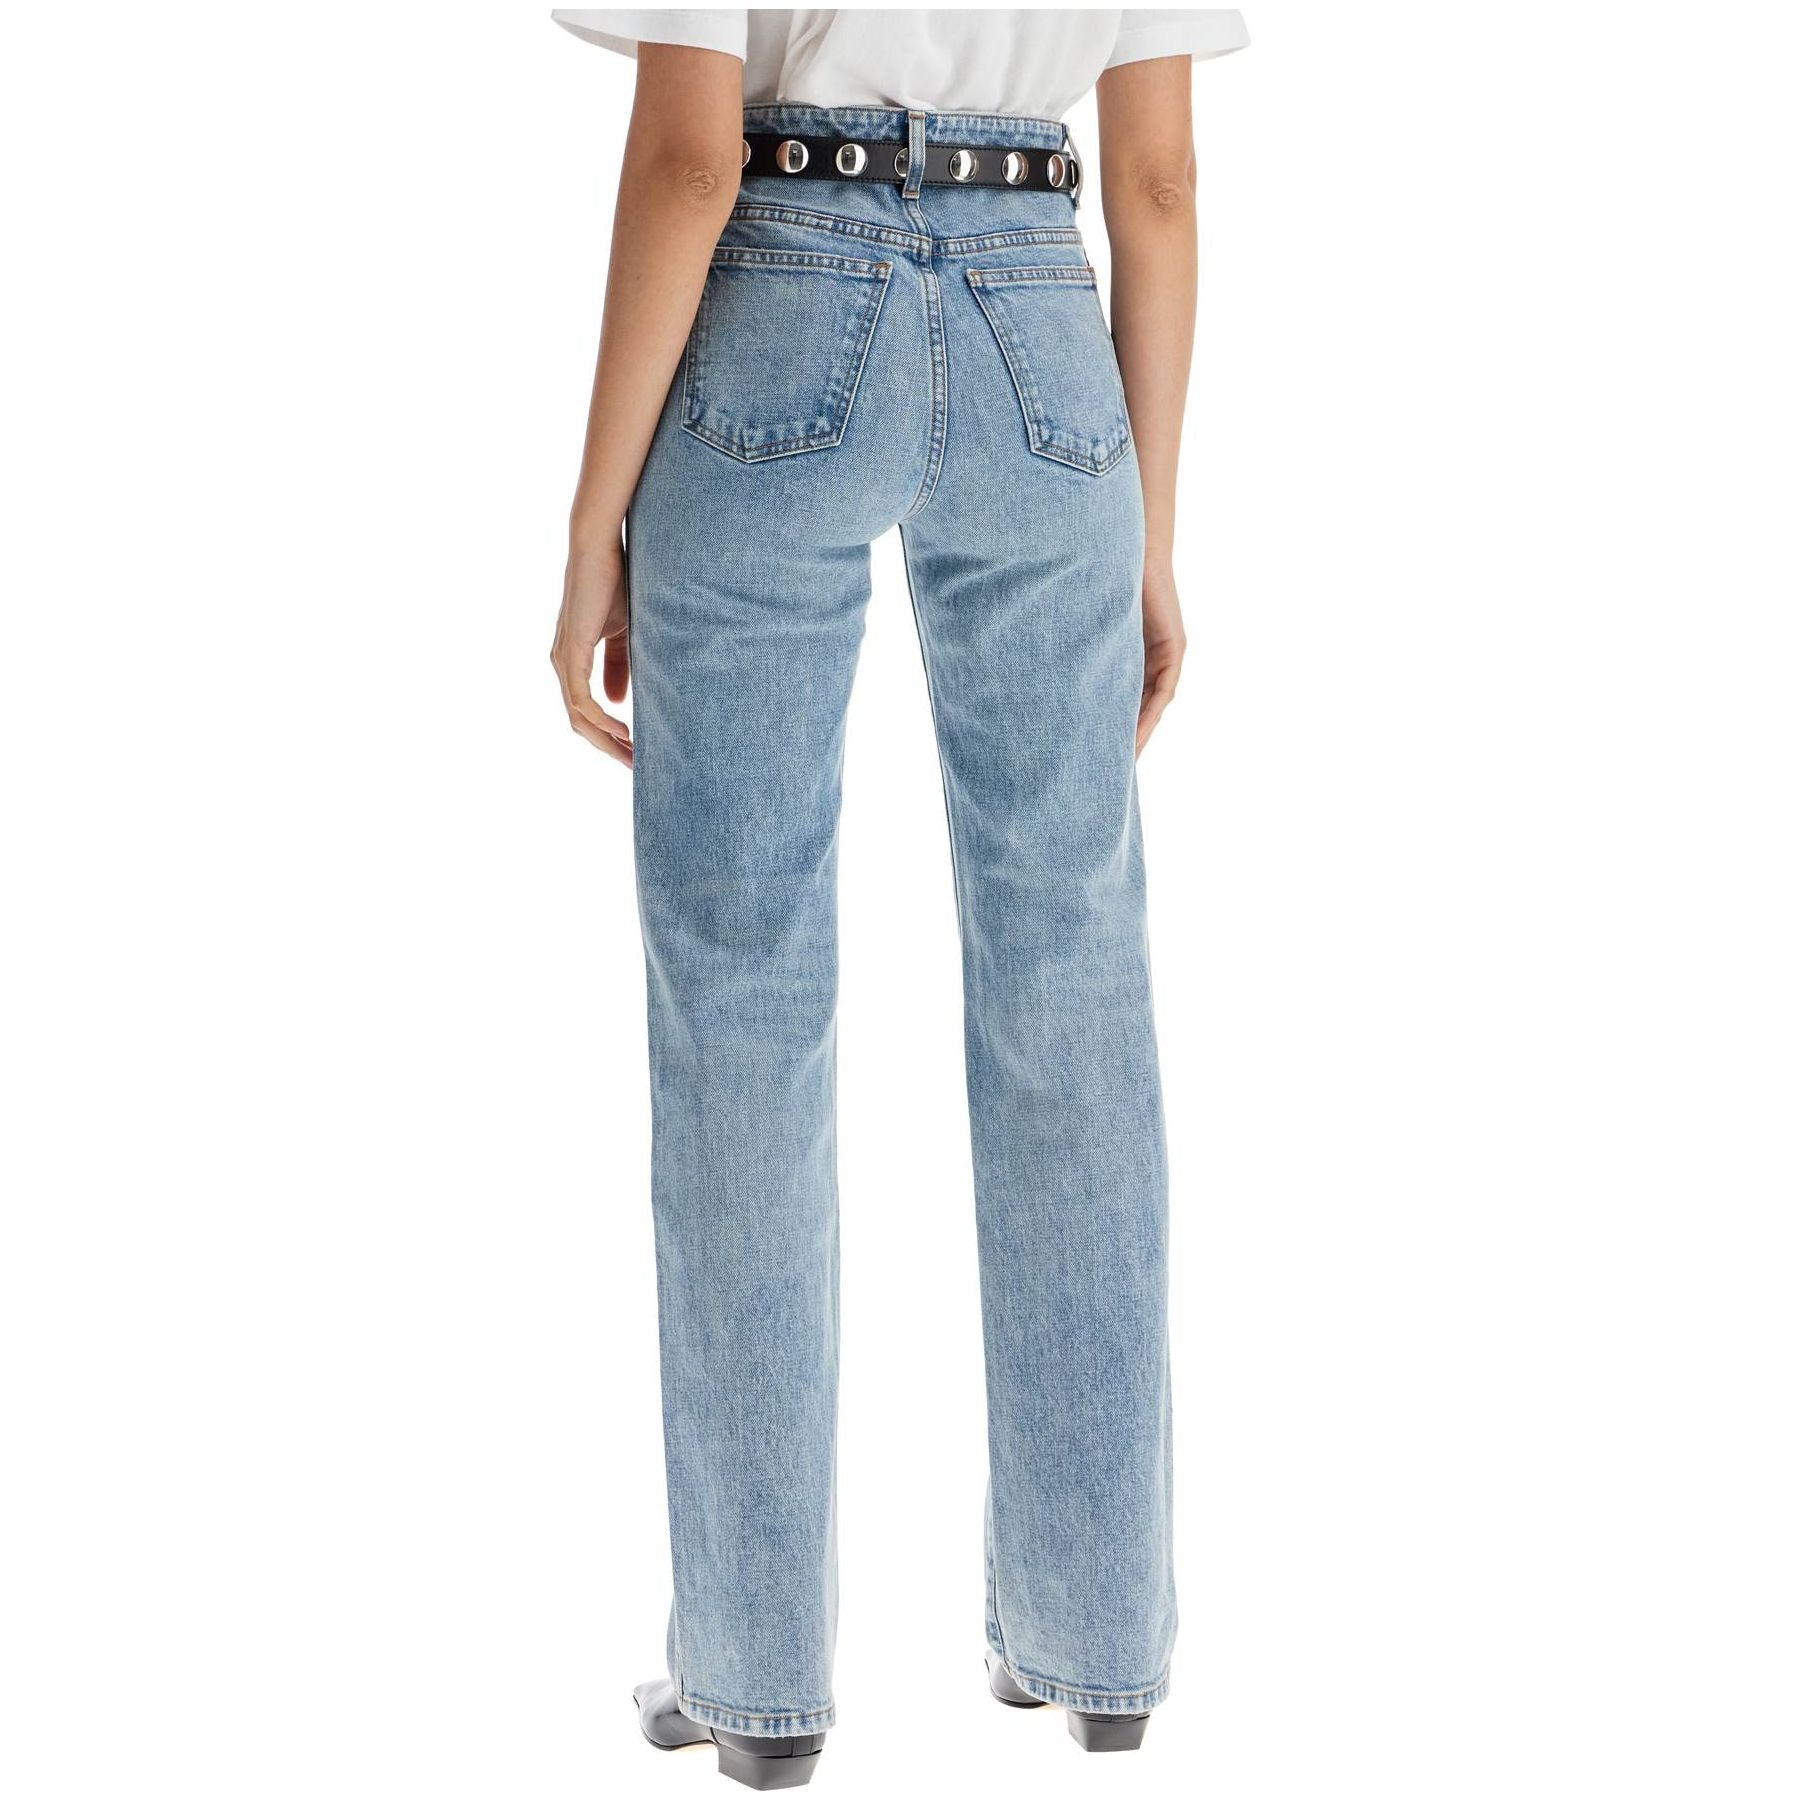 The Danielle Stretch Jeans